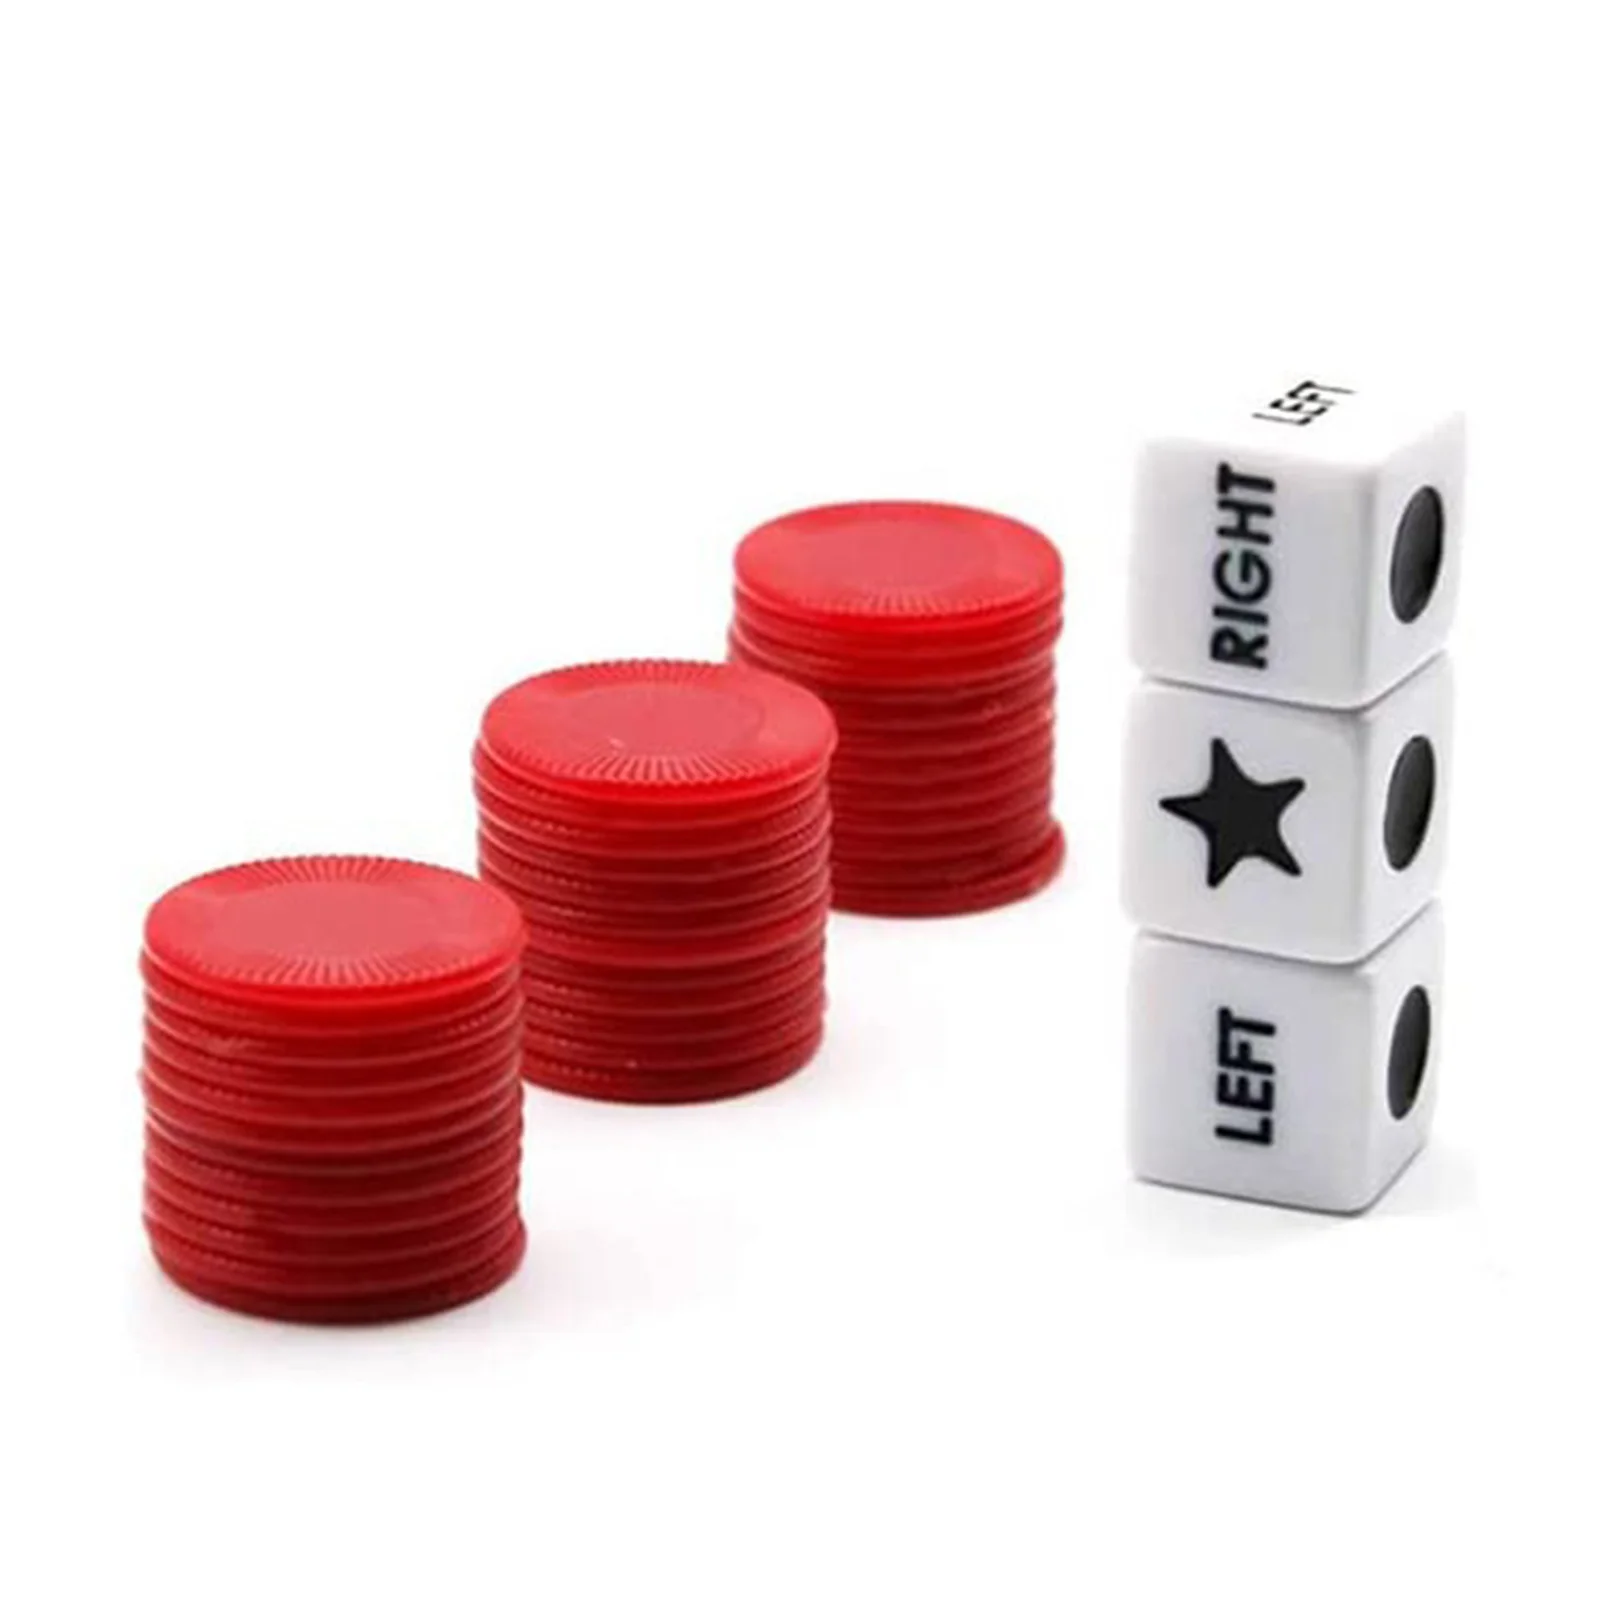 

Left Right Center Dice Game Innovative Left Right Center Table Game With 3 Dices And 24 Random Color Chips For Family Nights